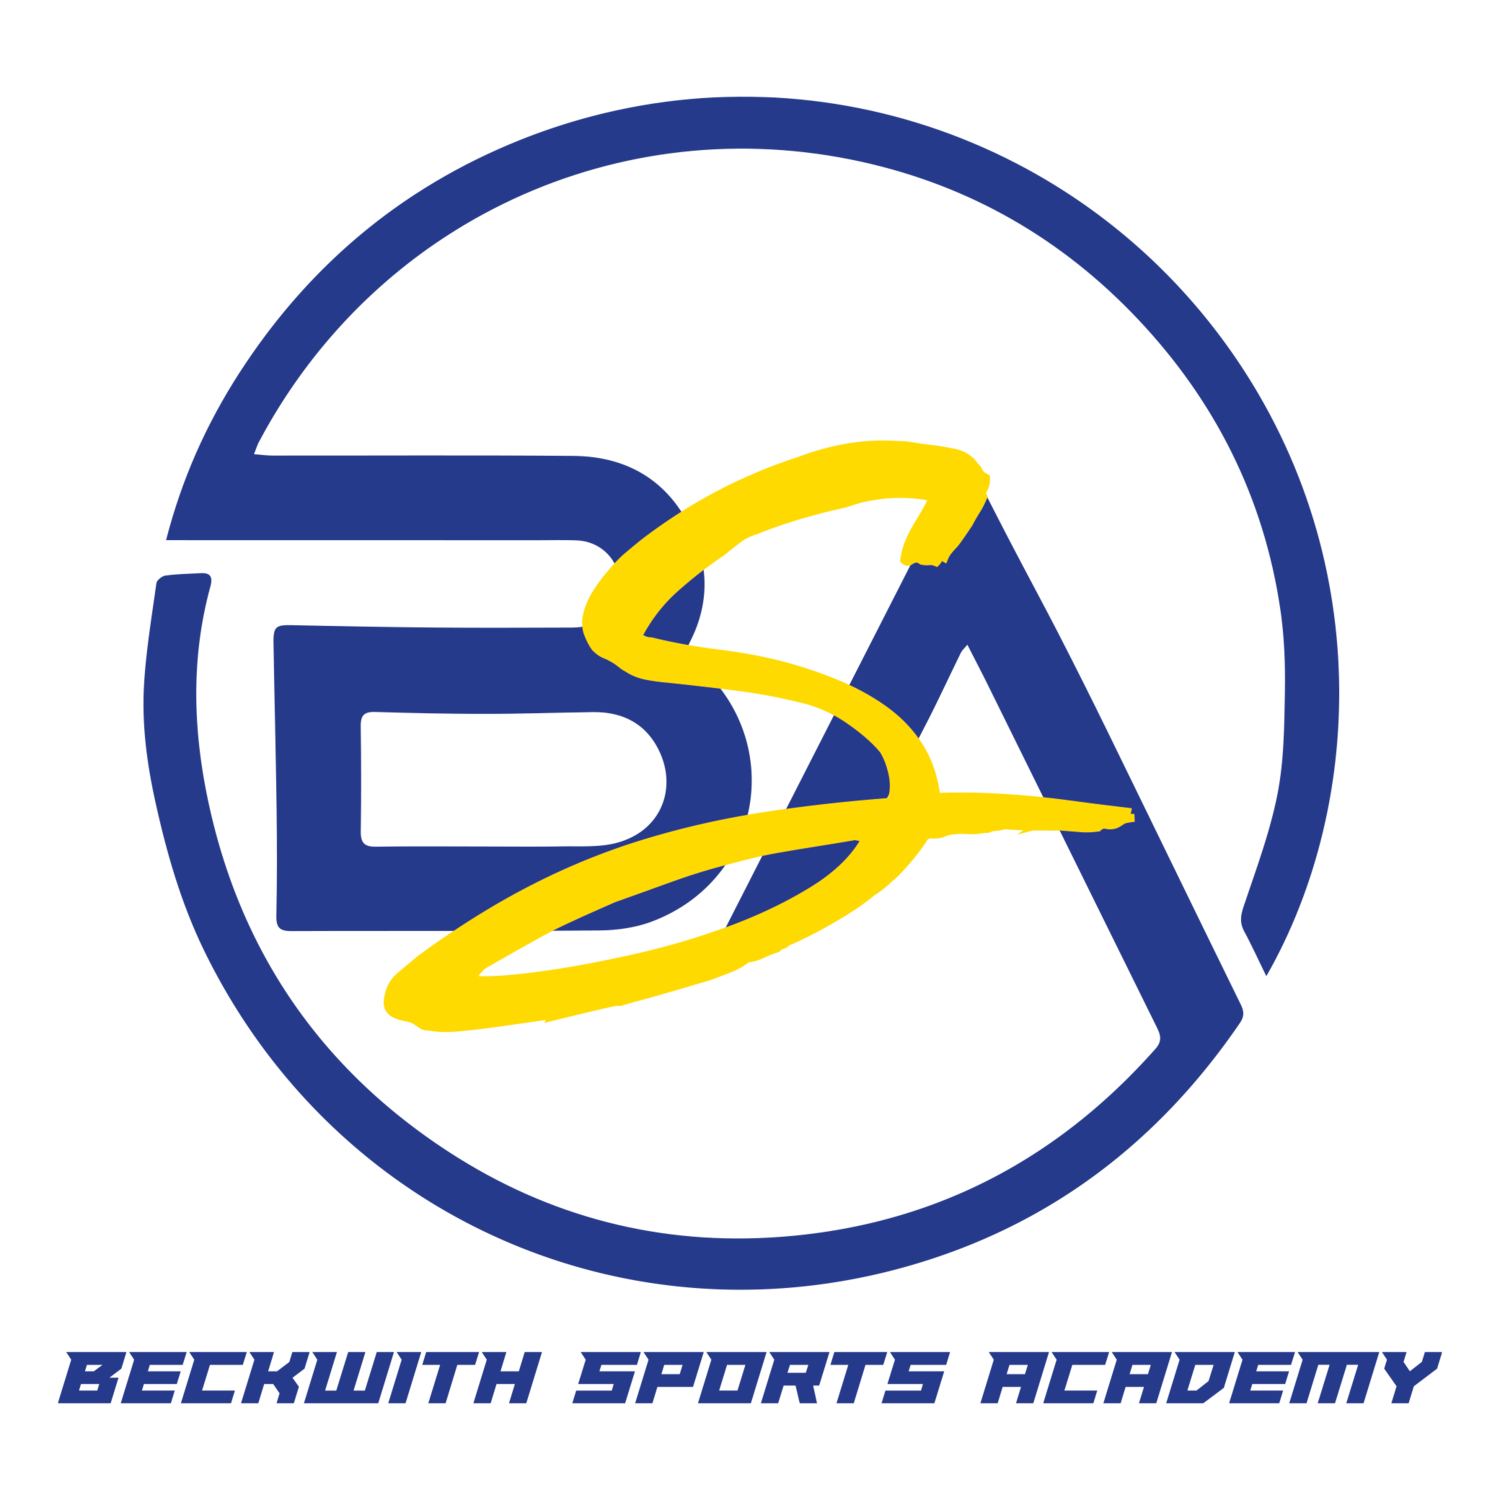 Beckwith Sports Academy